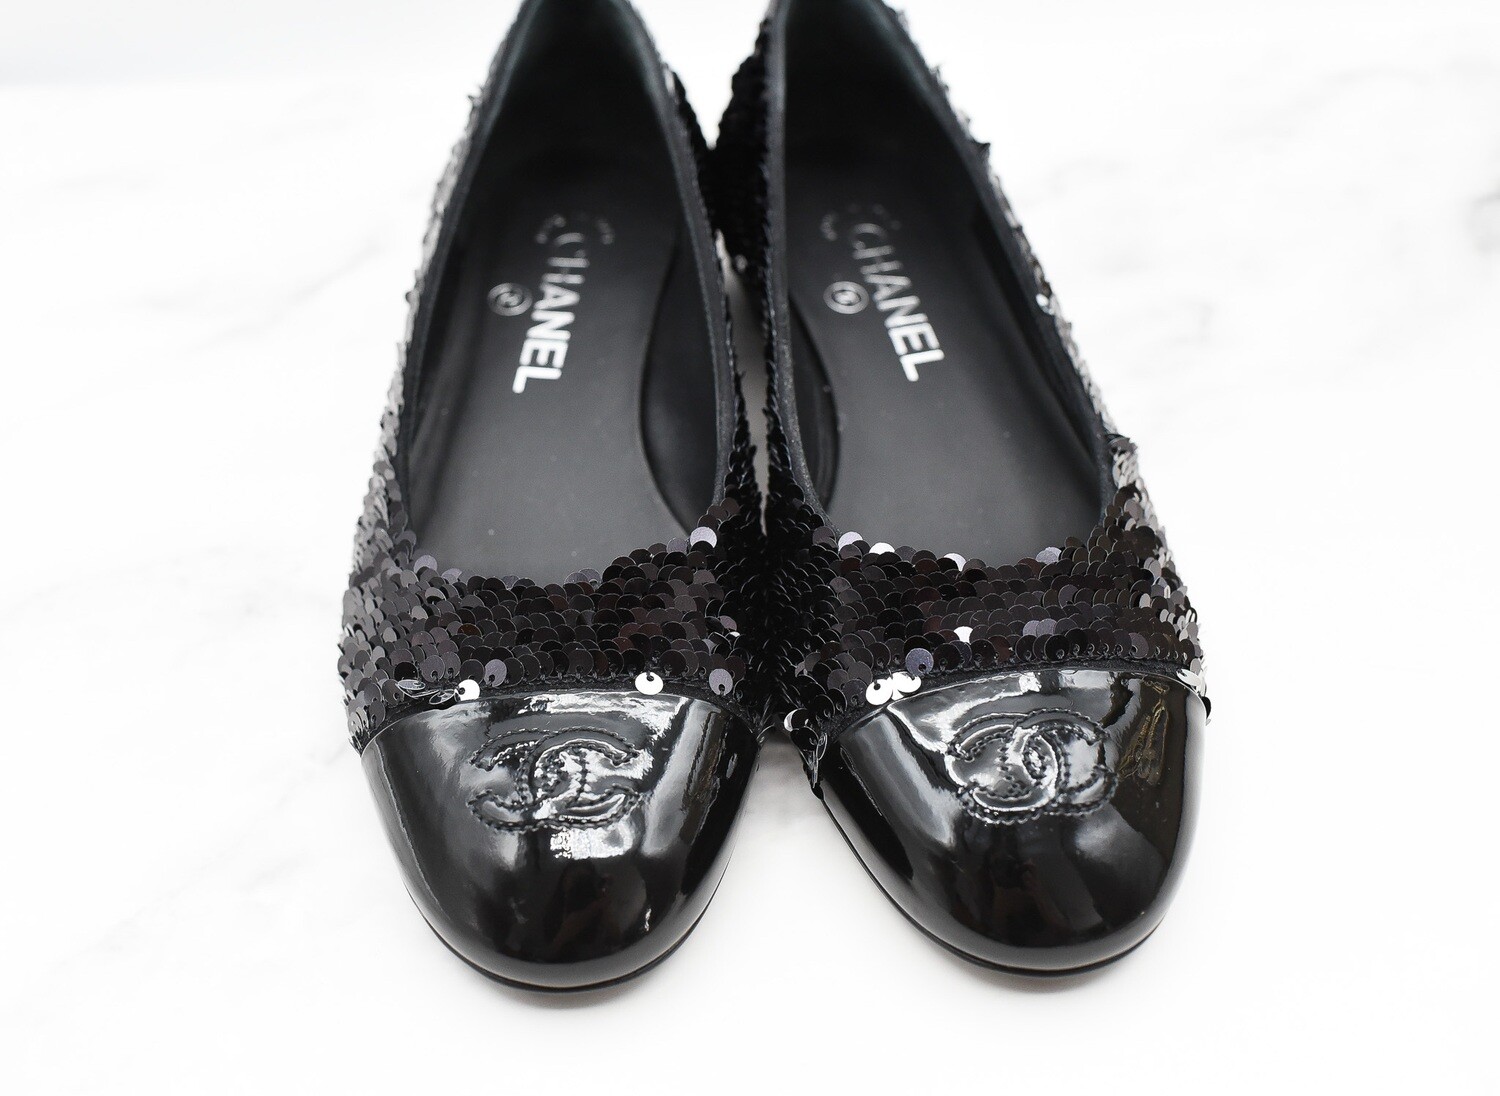 Chanel Ballet Flats, Black and Silver Sequins, Size 37.5, New in Box GA001